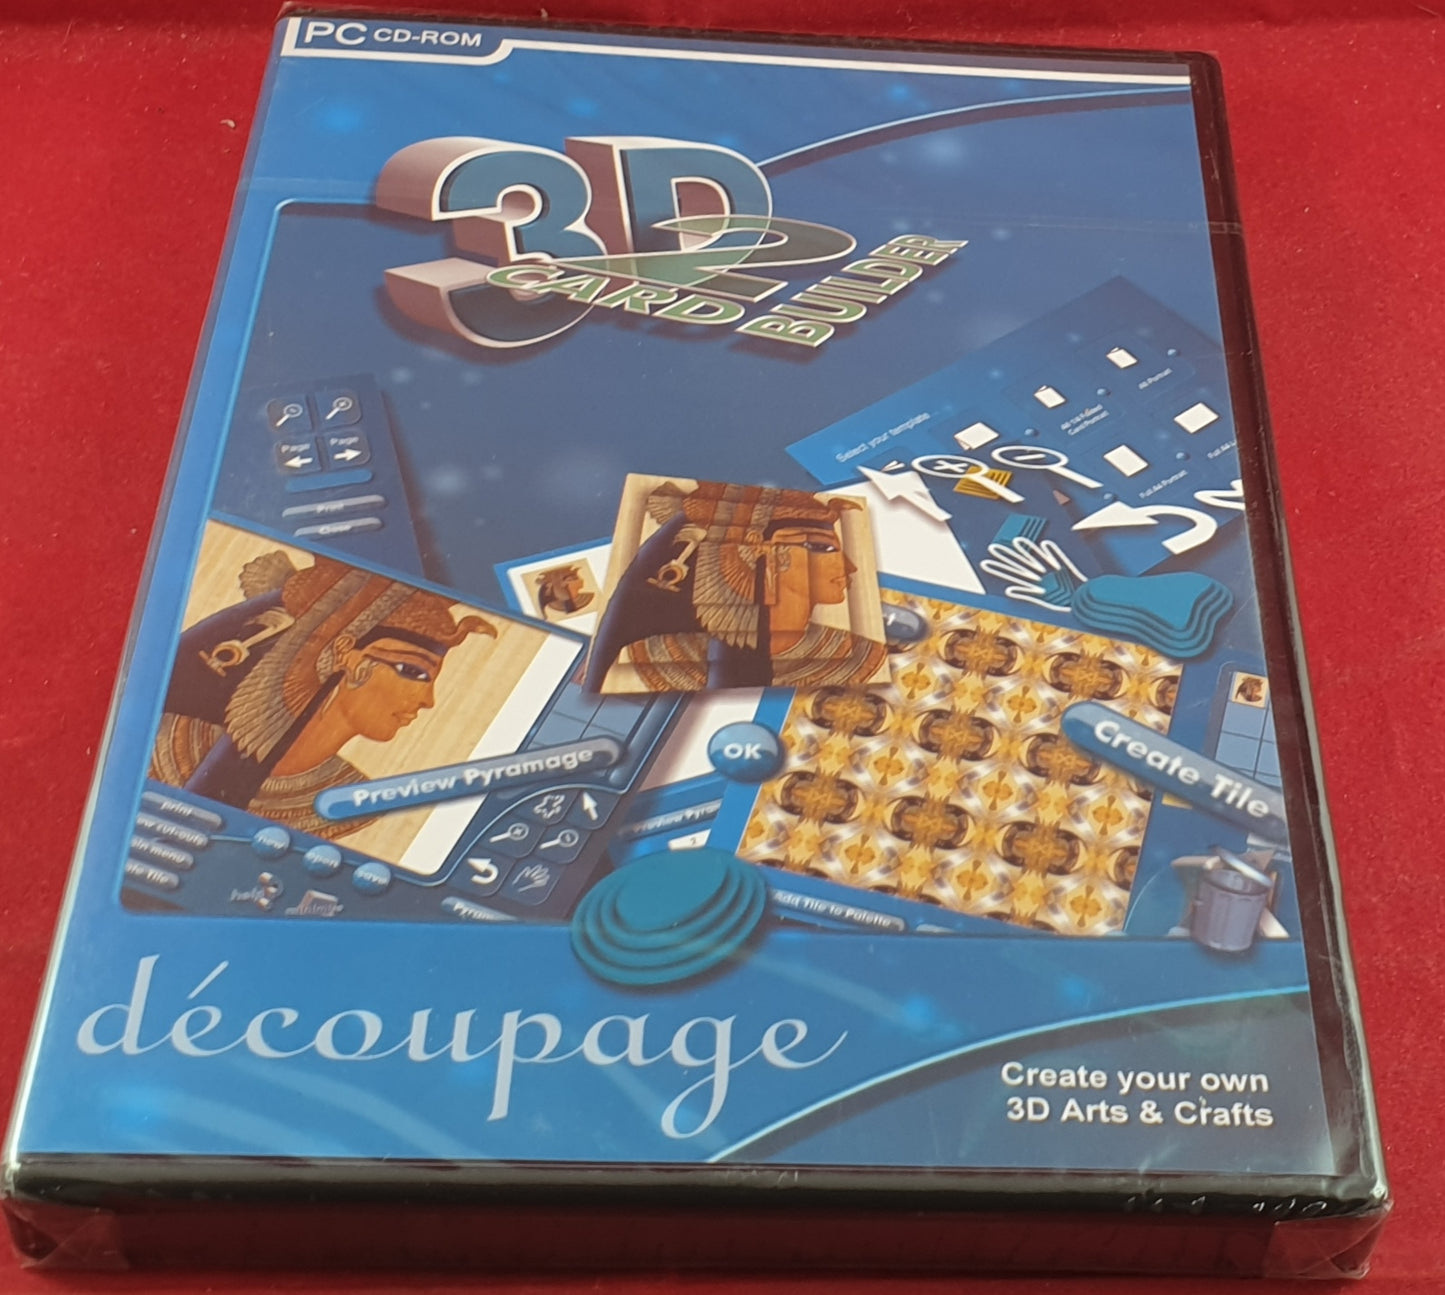 Brand New and Sealed 3D Decoupage RARE PC Game